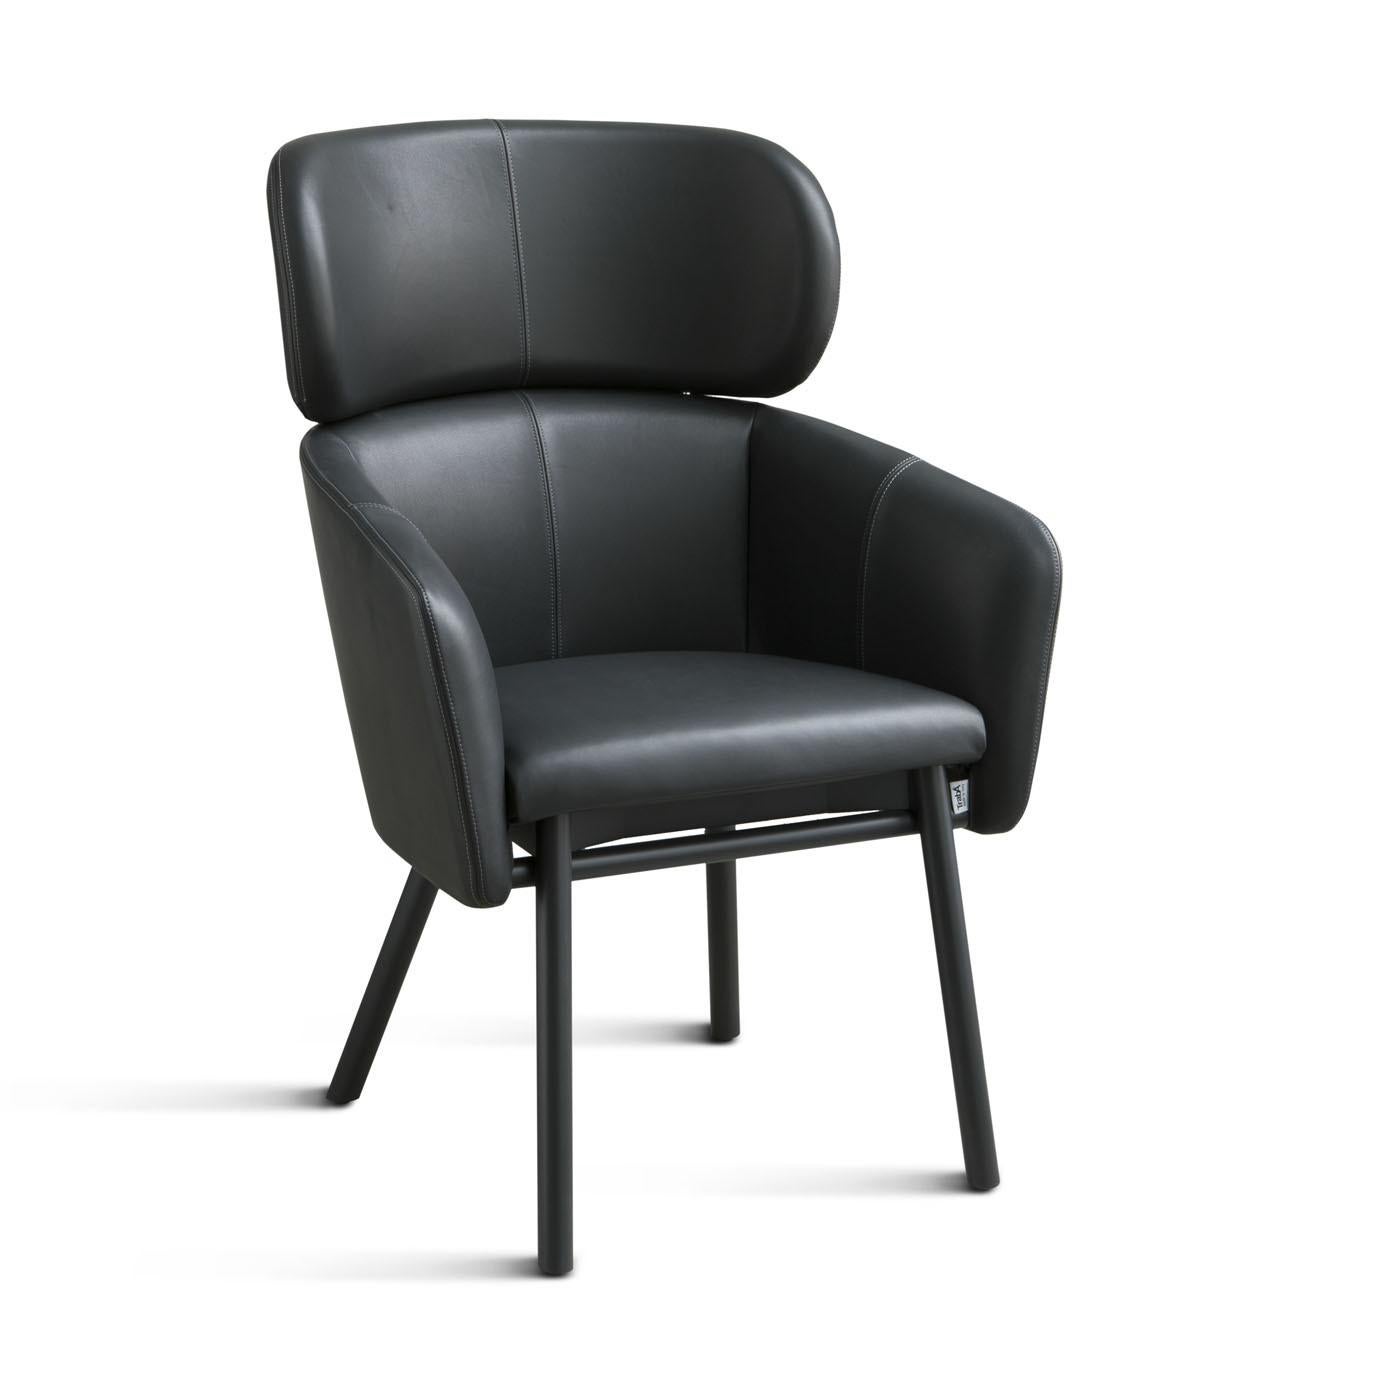 Italian Balù Extra Large Black Chair by Emilio Nanni For Sale